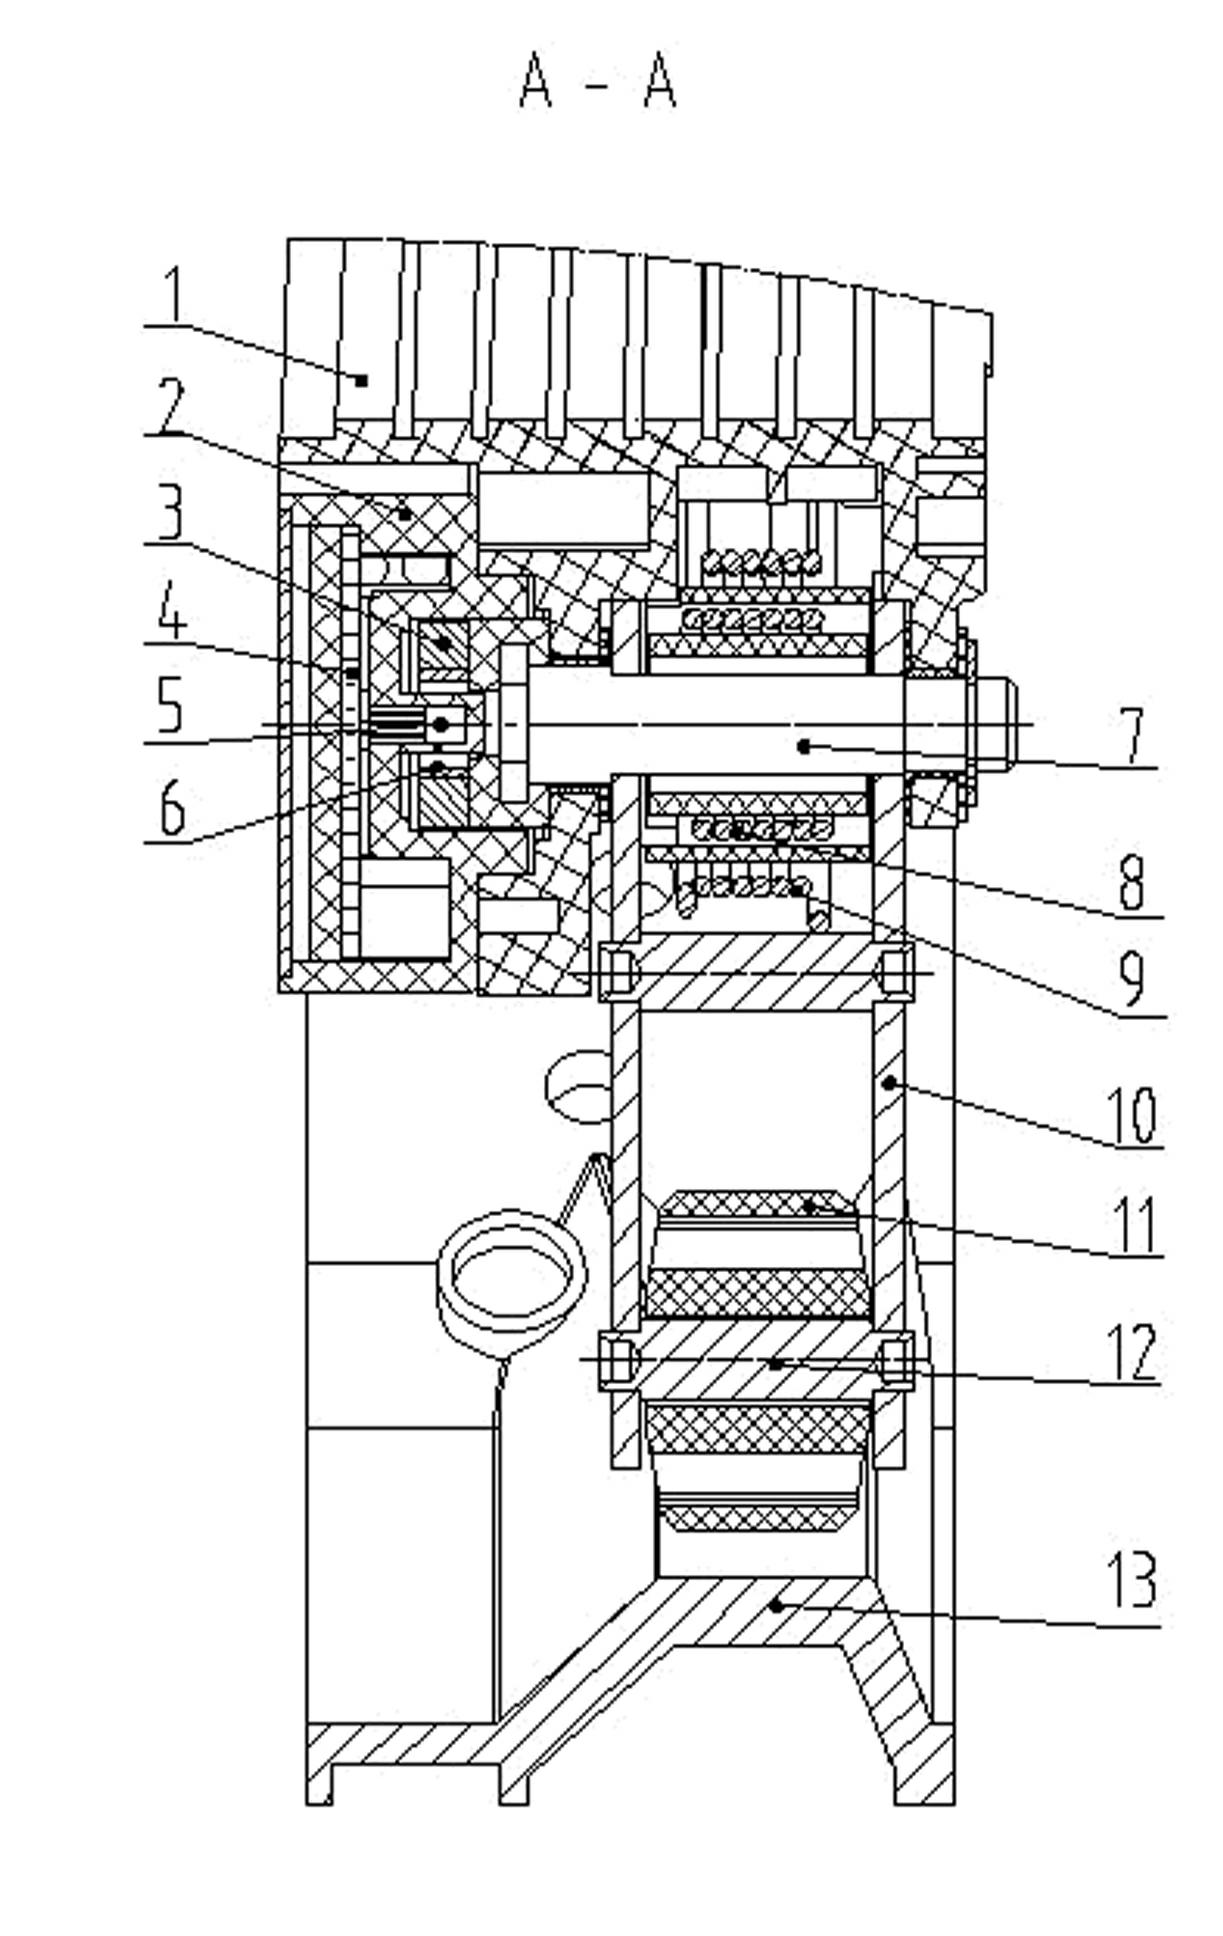 Electronic accelerator pedal with high-linearity output signal